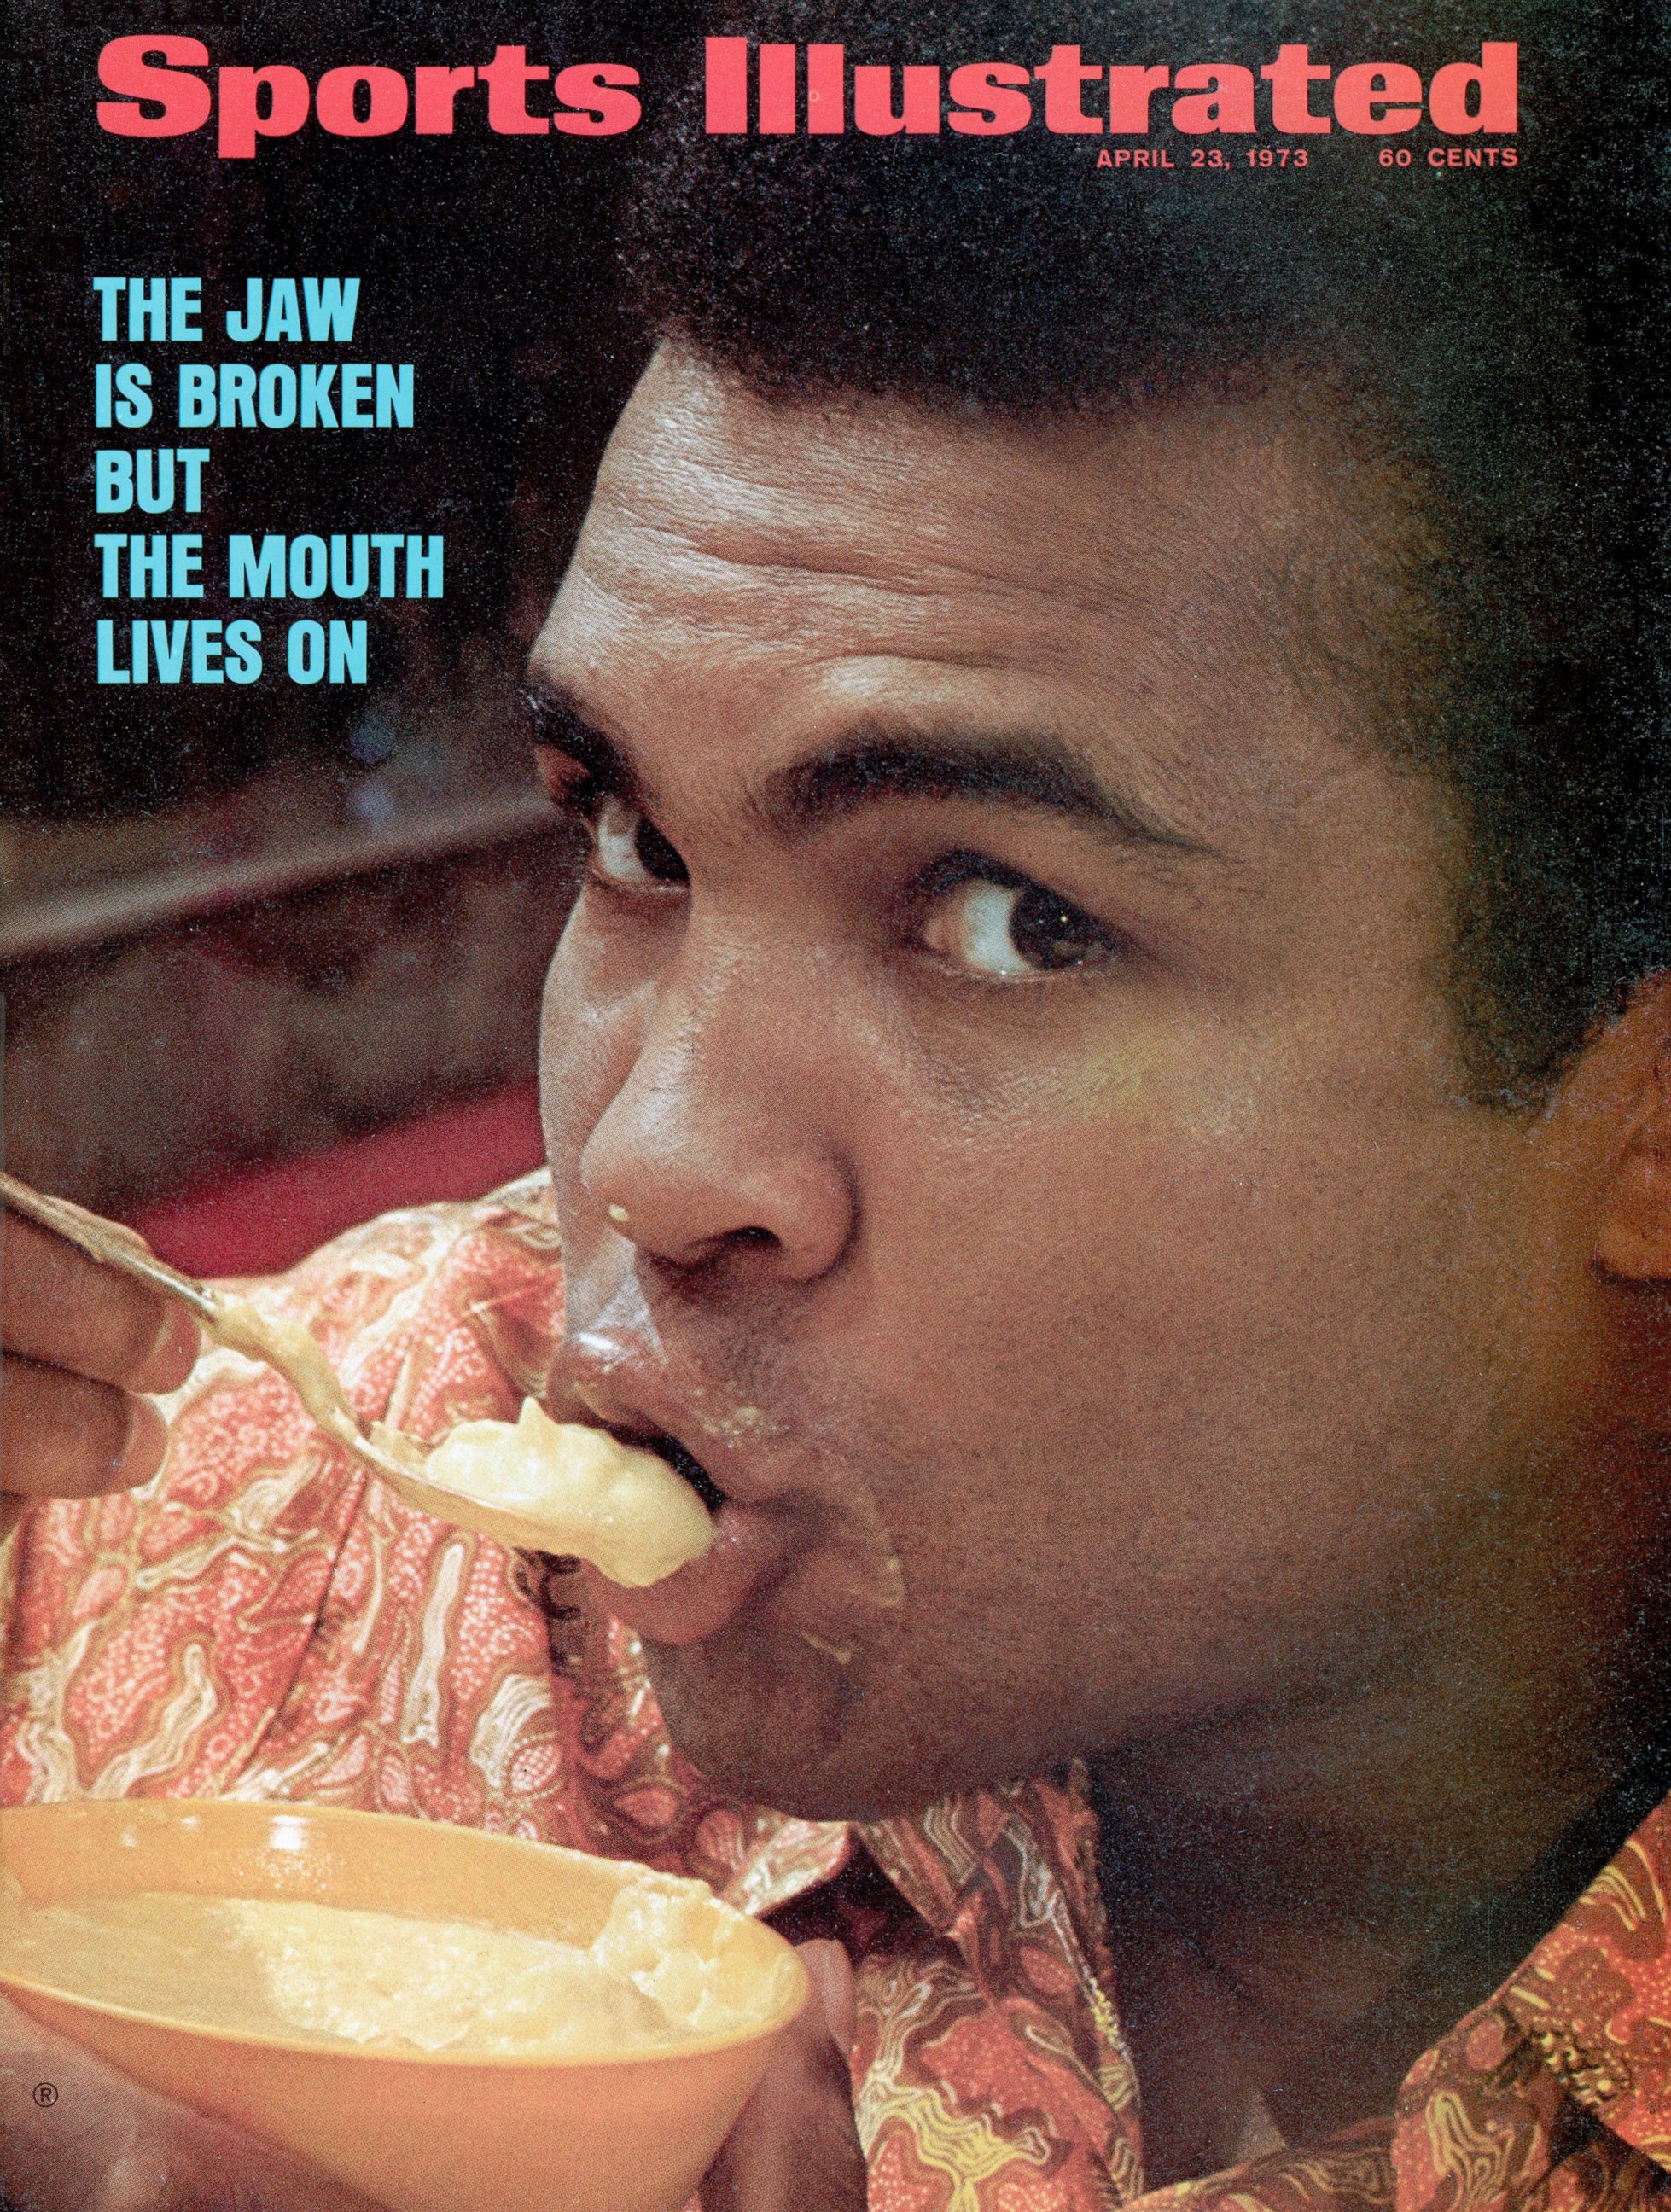 PHOTO: Muhammad Ali on the April 23, 1973 cover of Sports Illustrated.